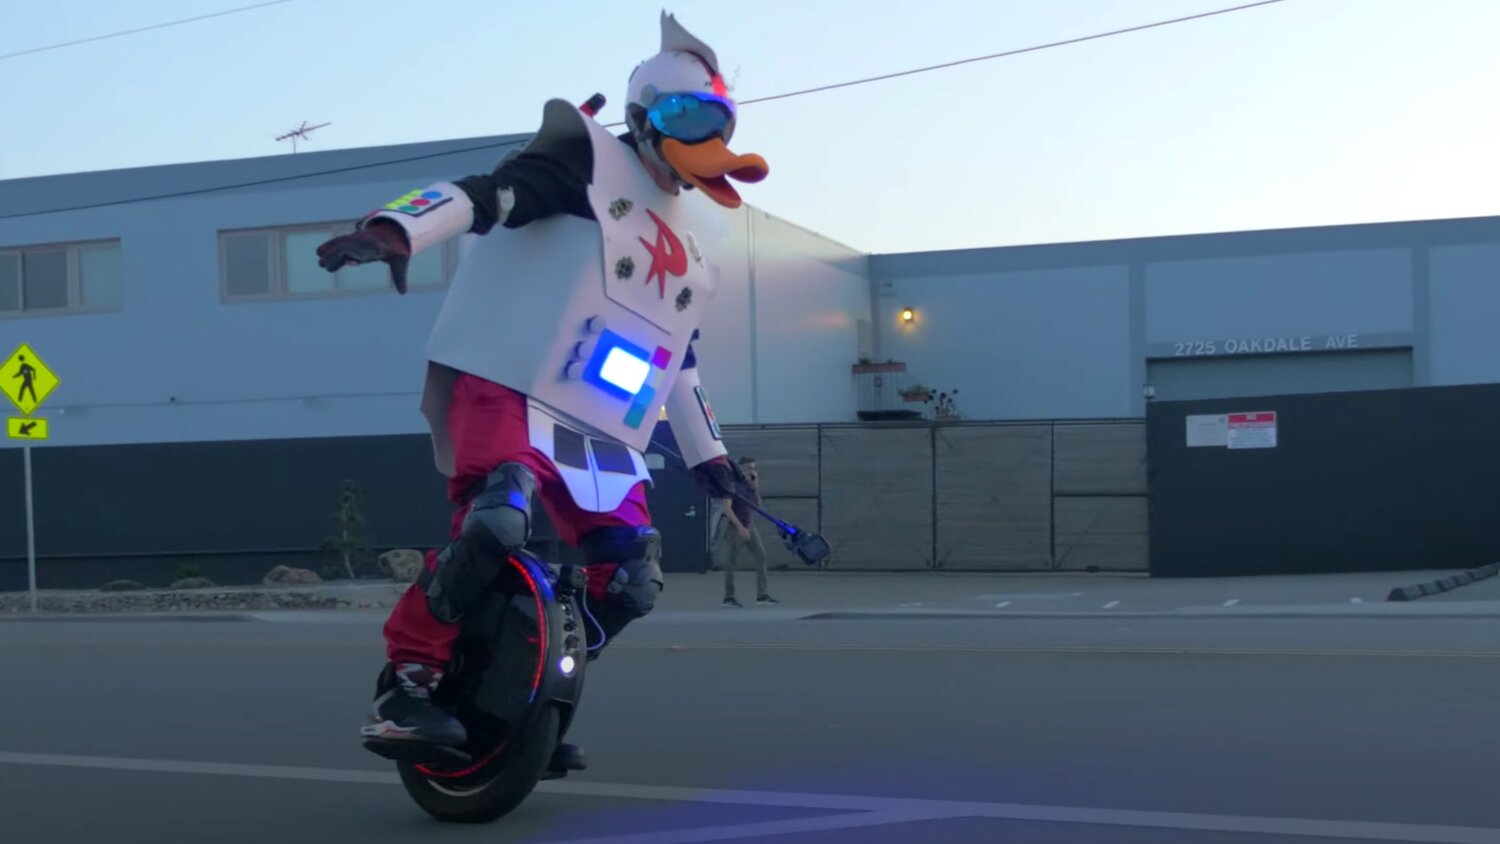 radical-gizmoduck-cosplay-rides-through-the-streets-on-an-electric-wheel-social.jpg